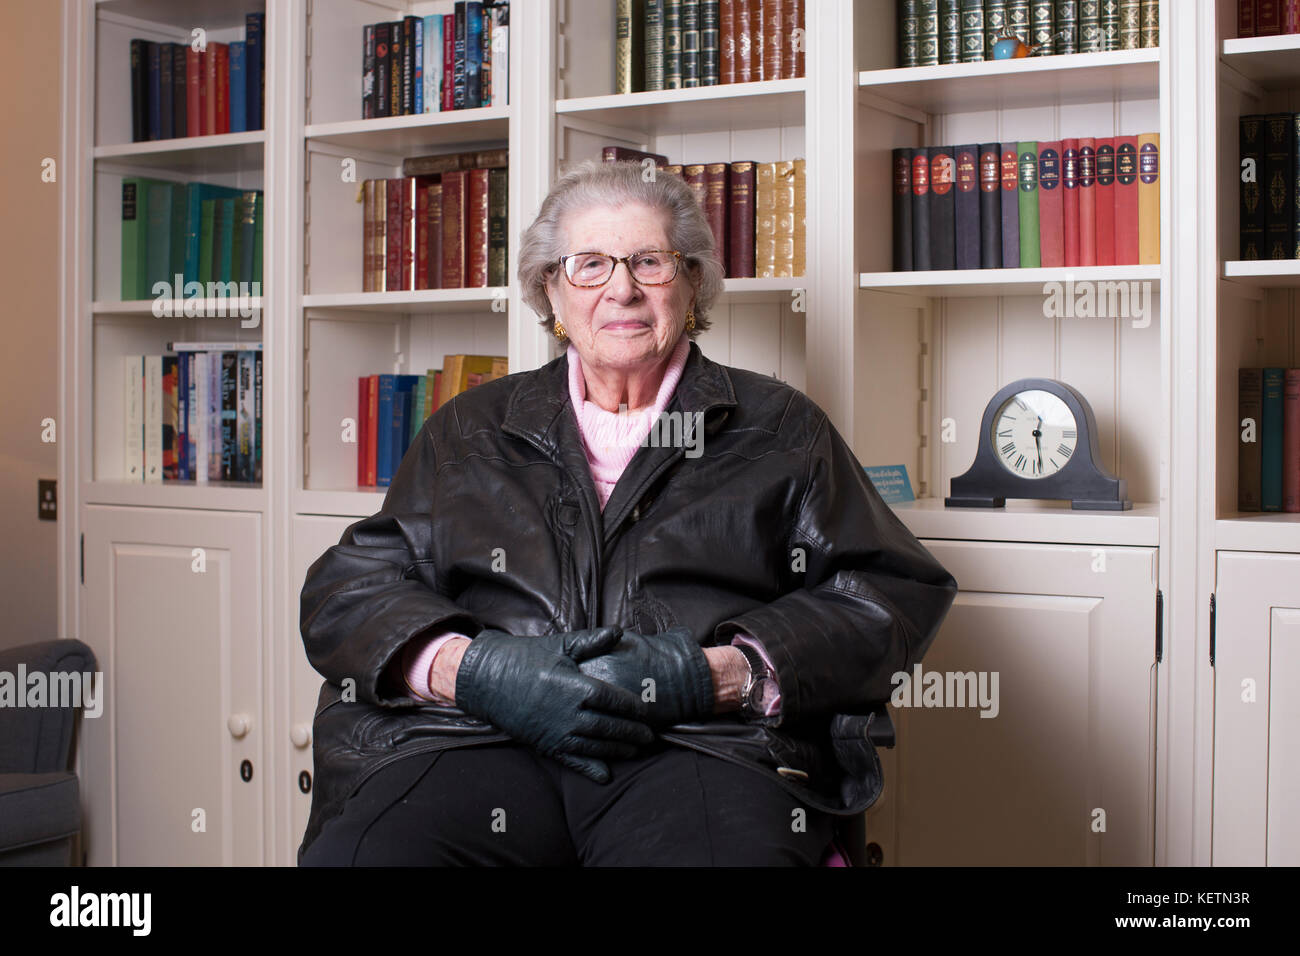 Jean Barker, Baroness Trumpington of Sandwich (95), who worked at Bletchley Park from 1940 and oldest female peer, retires from the House of Lords. Stock Photo